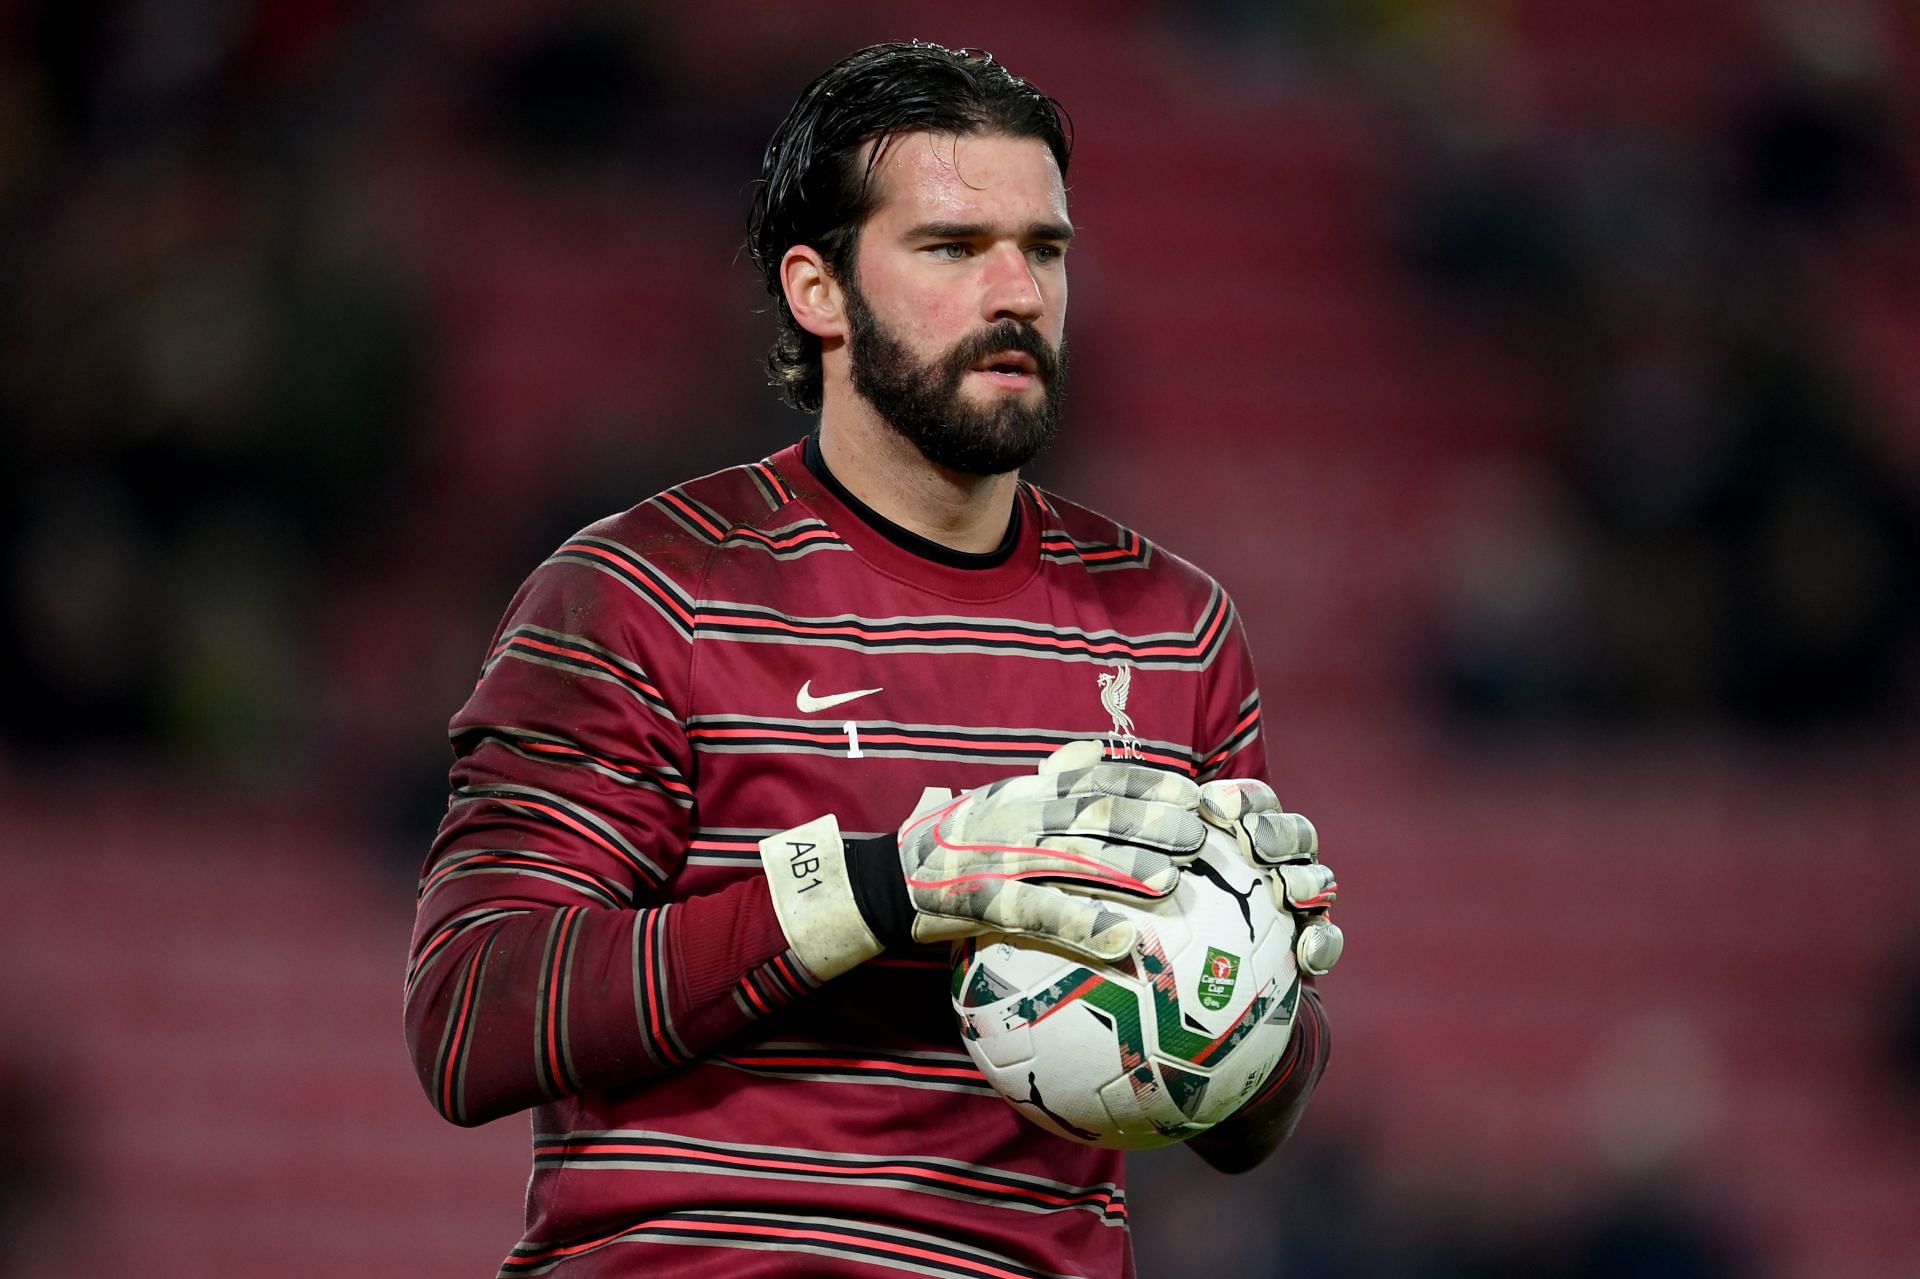 Alisson Becker has been a revelation in the Premier League